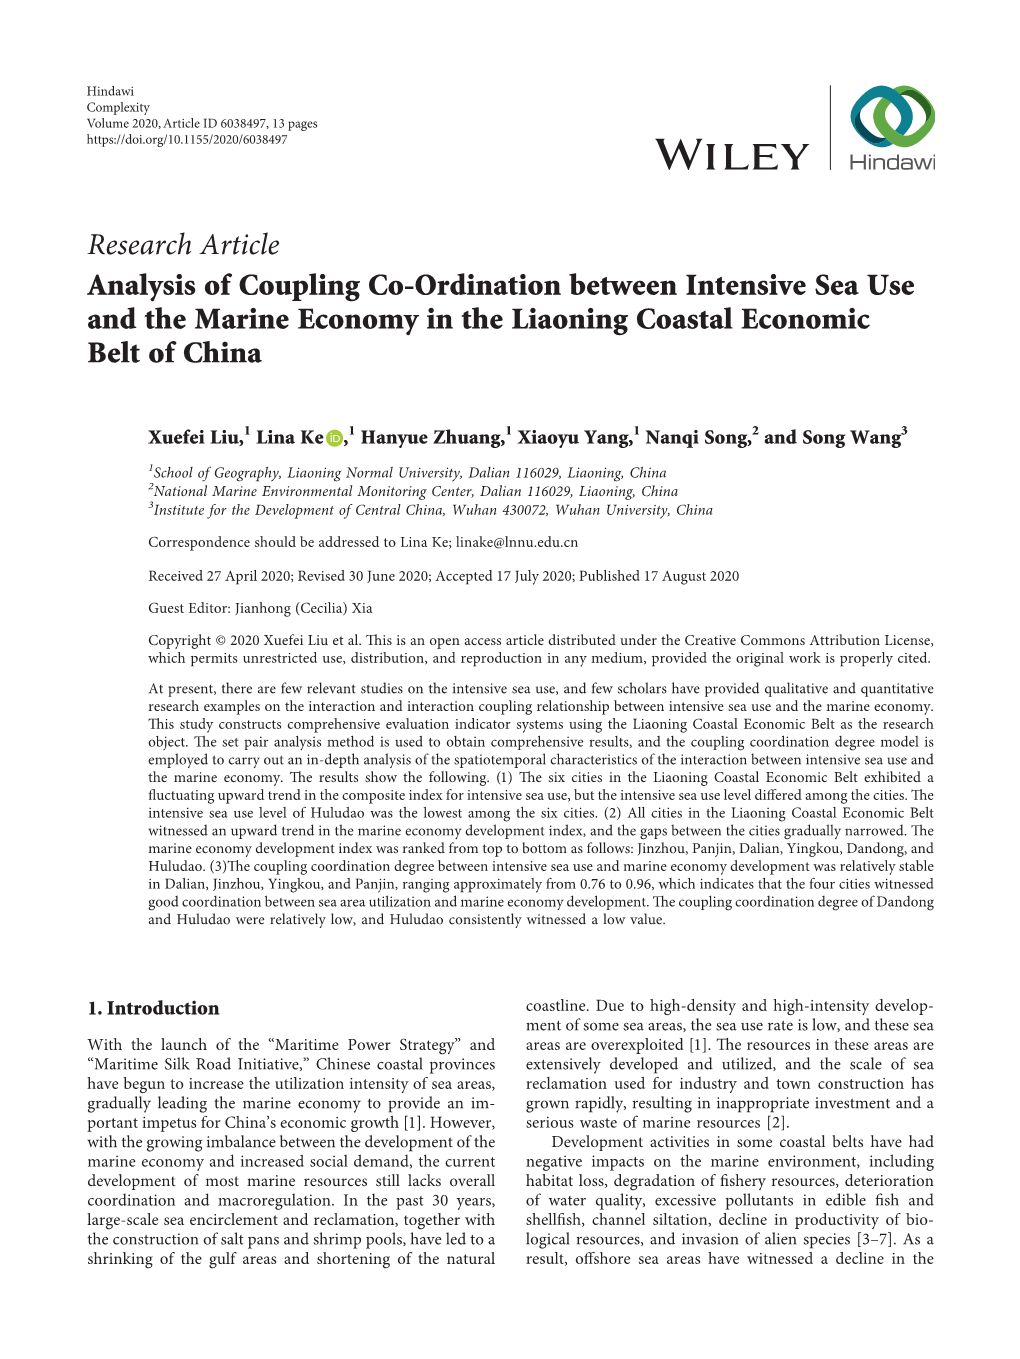 Analysis of Coupling Co-Ordination Between Intensive Sea Use and the Marine Economy in the Liaoning Coastal Economic Belt of China